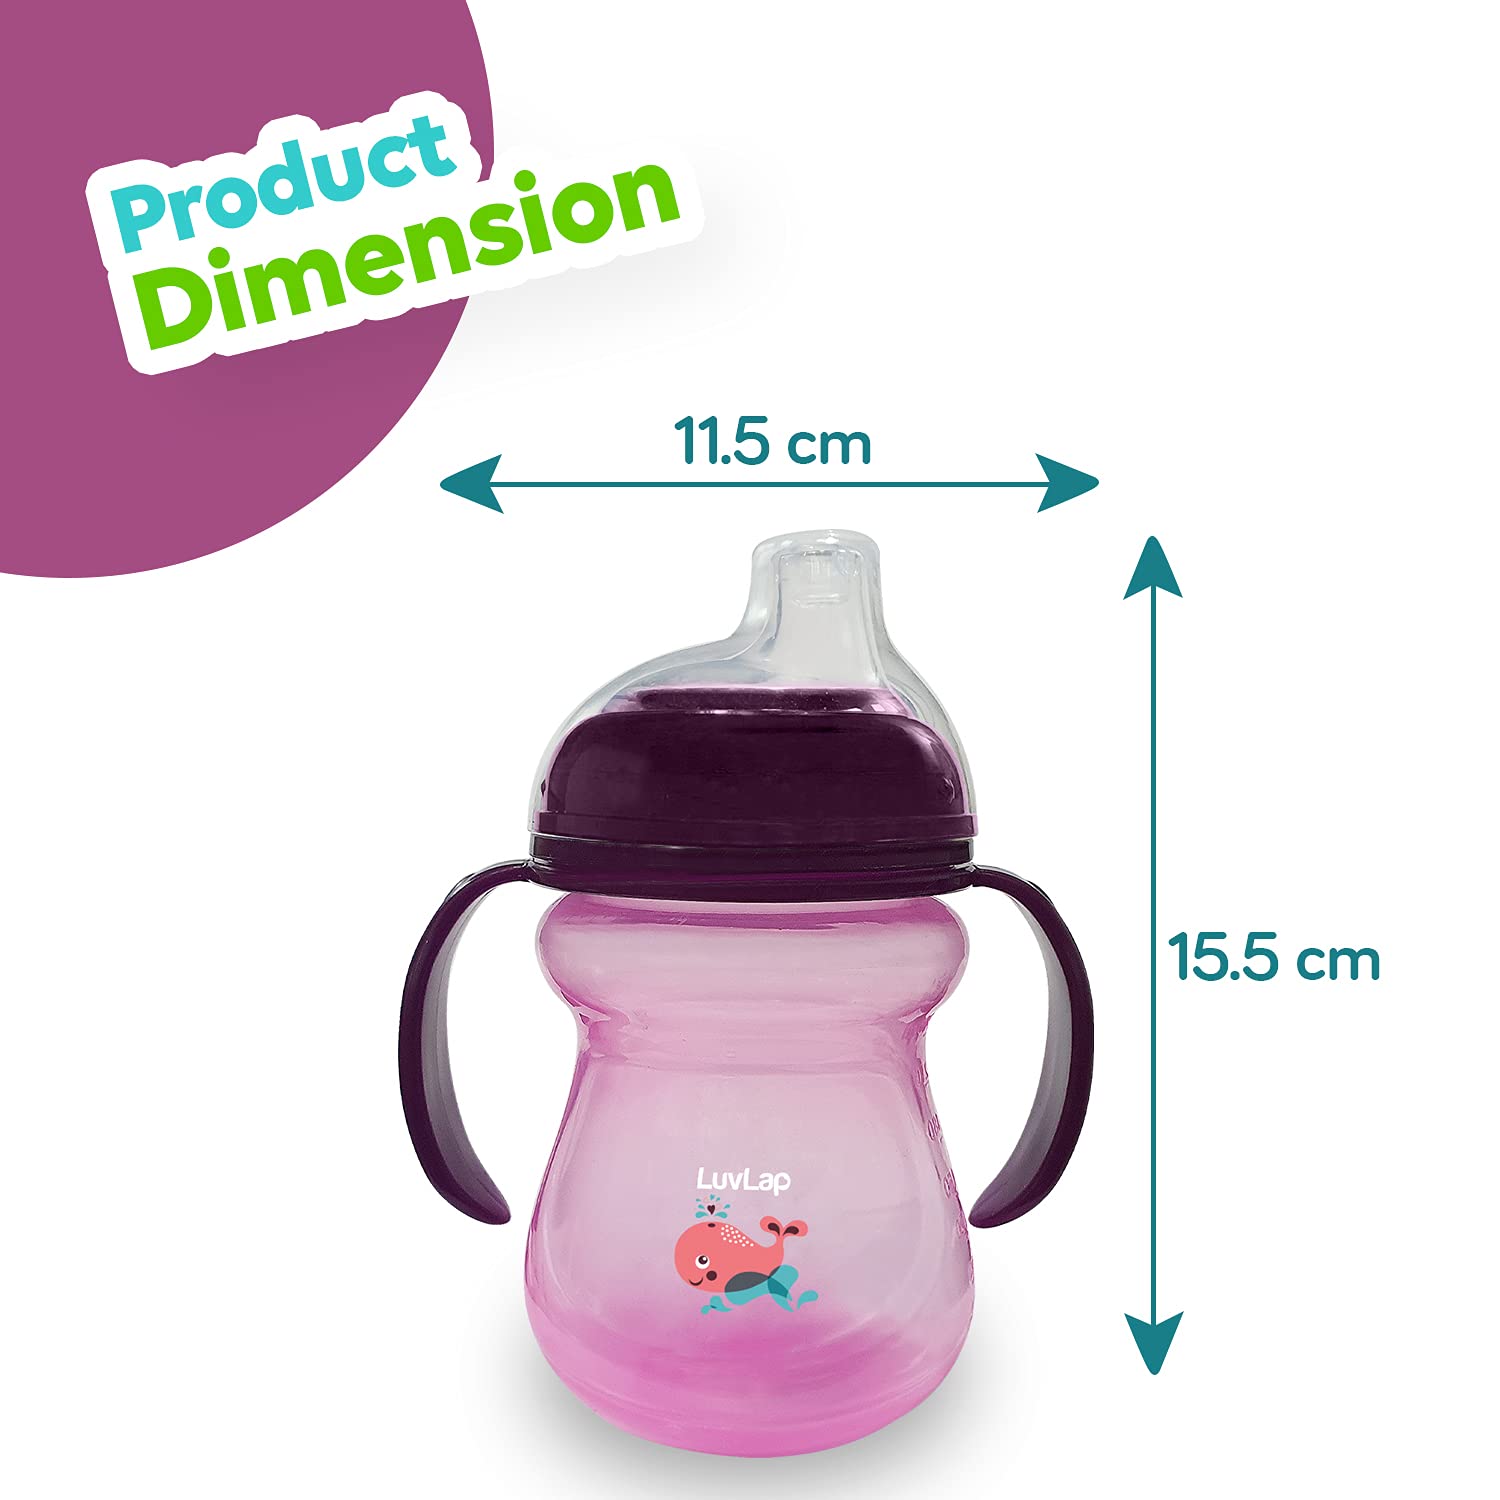 LuvLap Moby Little Spout Sipper for Infant/Toddler, 240ml, 6m+